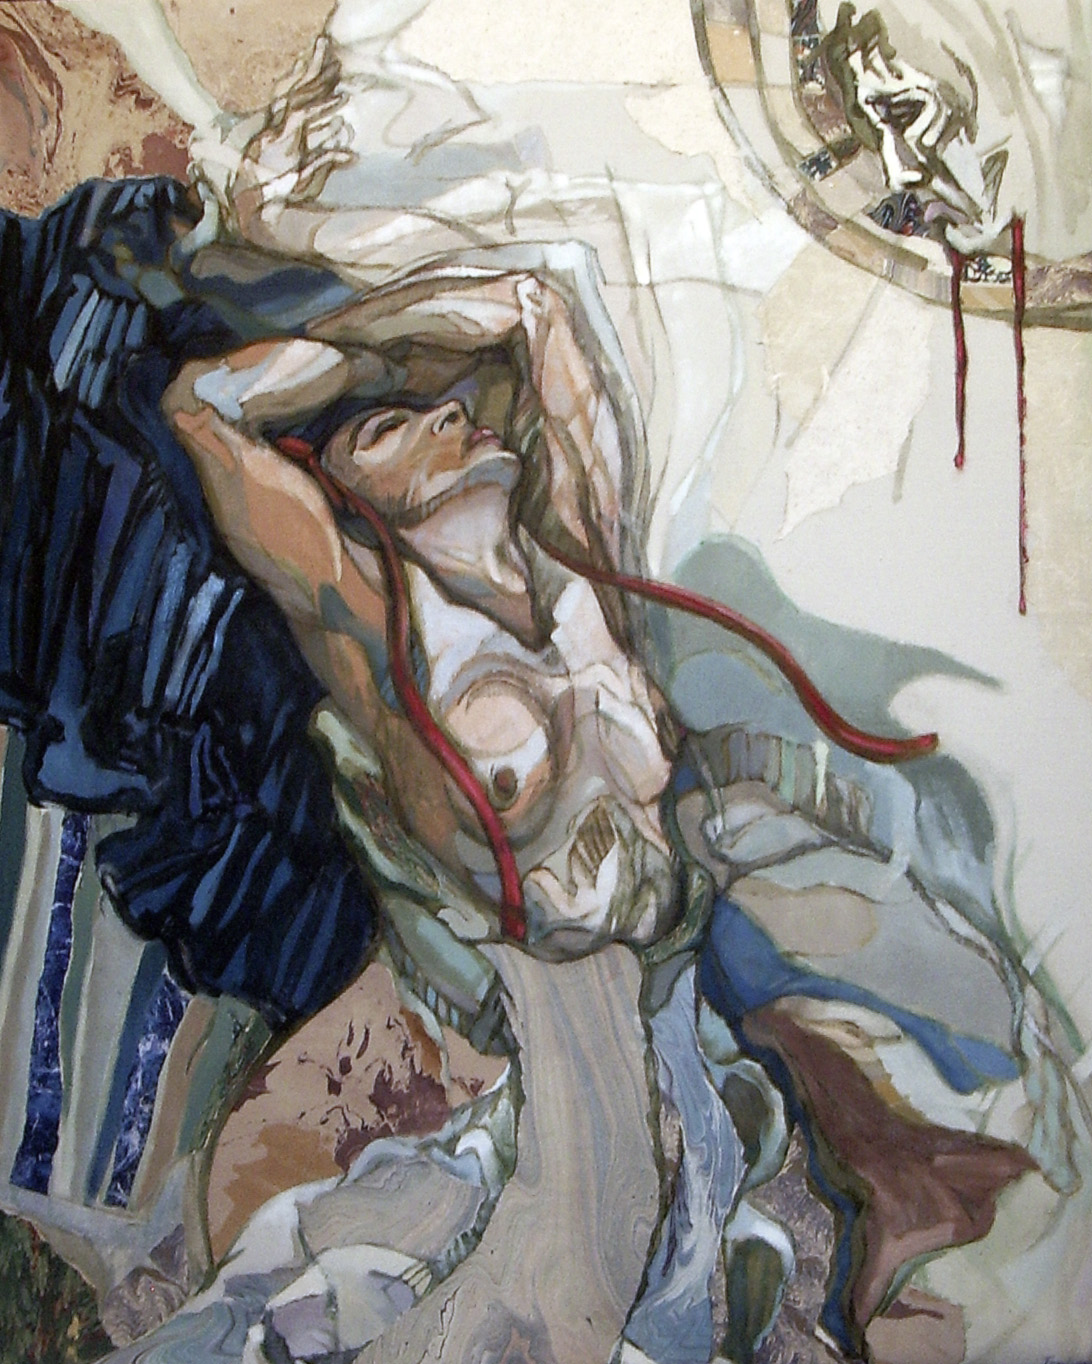 L’Apparition, oïl and collage on canvas, 42” x 34”, 2004, $2800